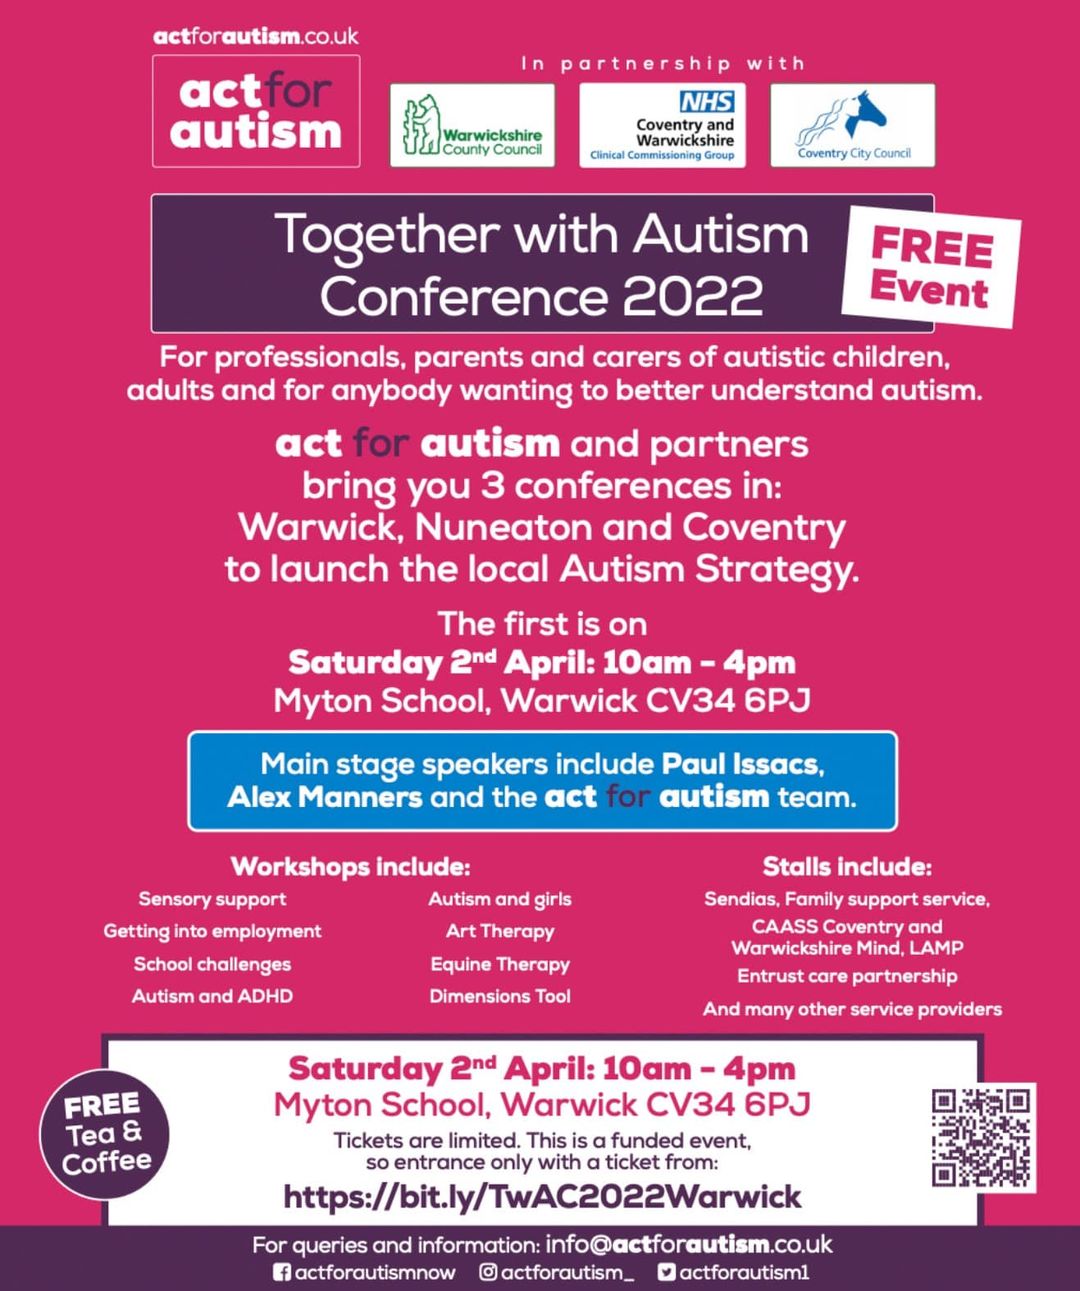 Act for Autism Conference Park Lane